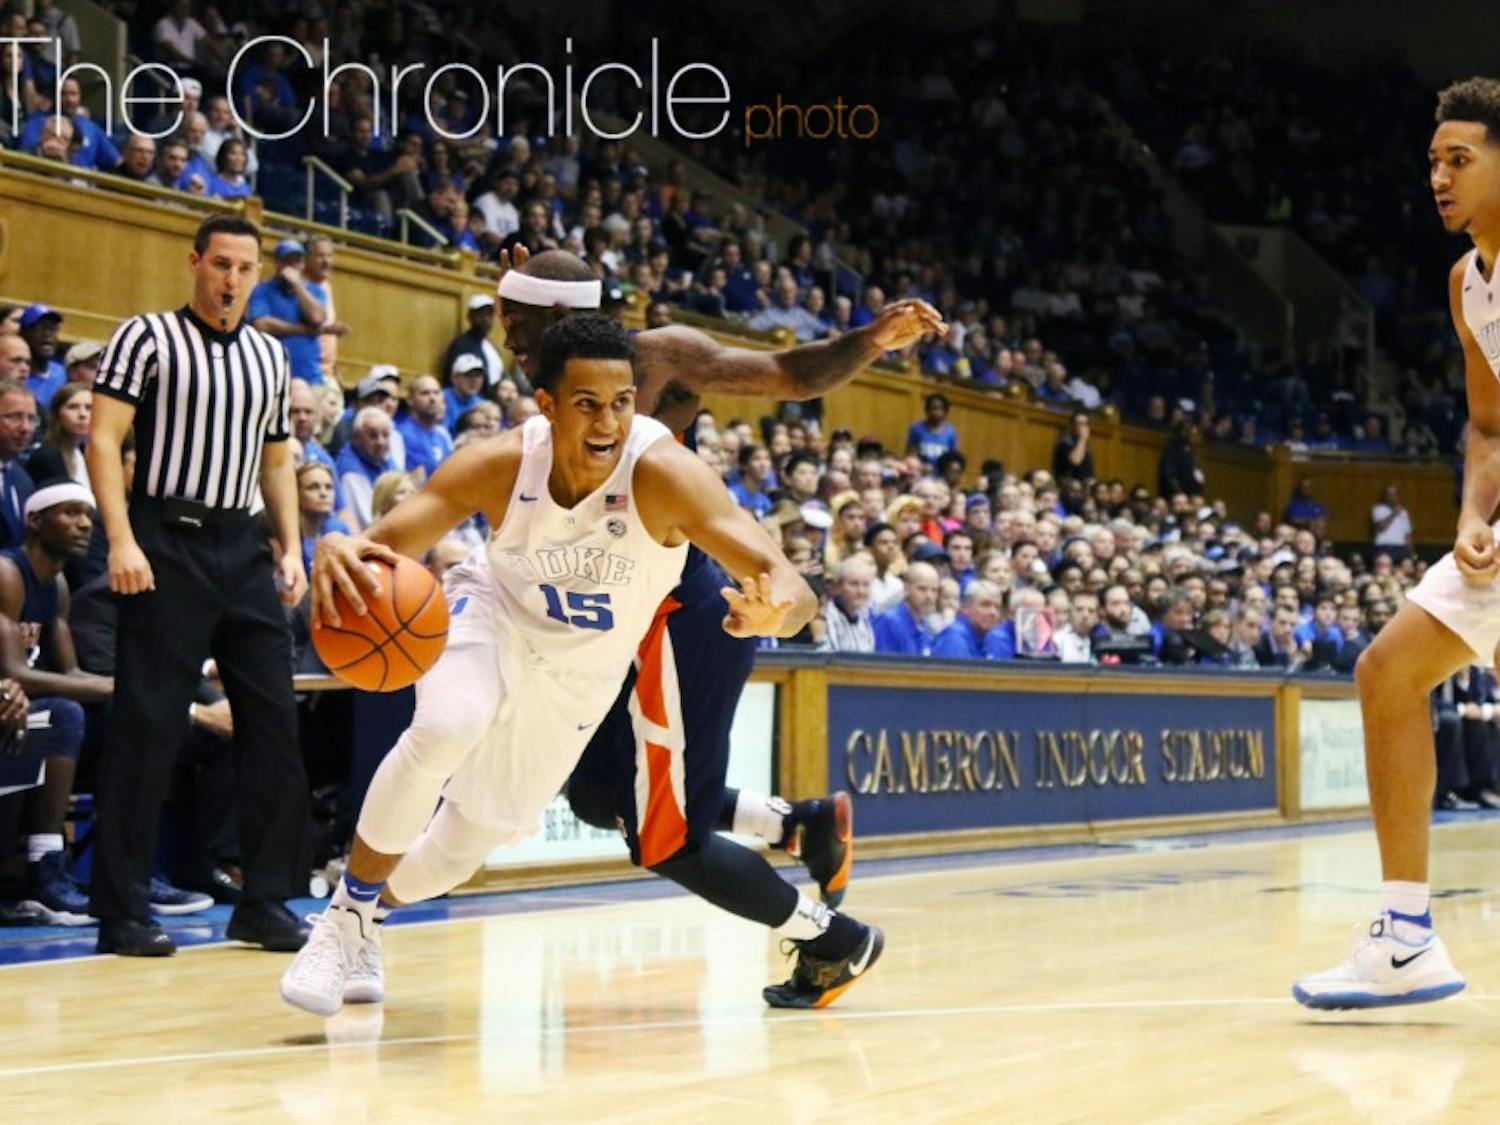 Frank Jackson can attack the basket and score from anywhere on the floor, tallying 17 points in Duke's first exhibition against Virginia State Friday.